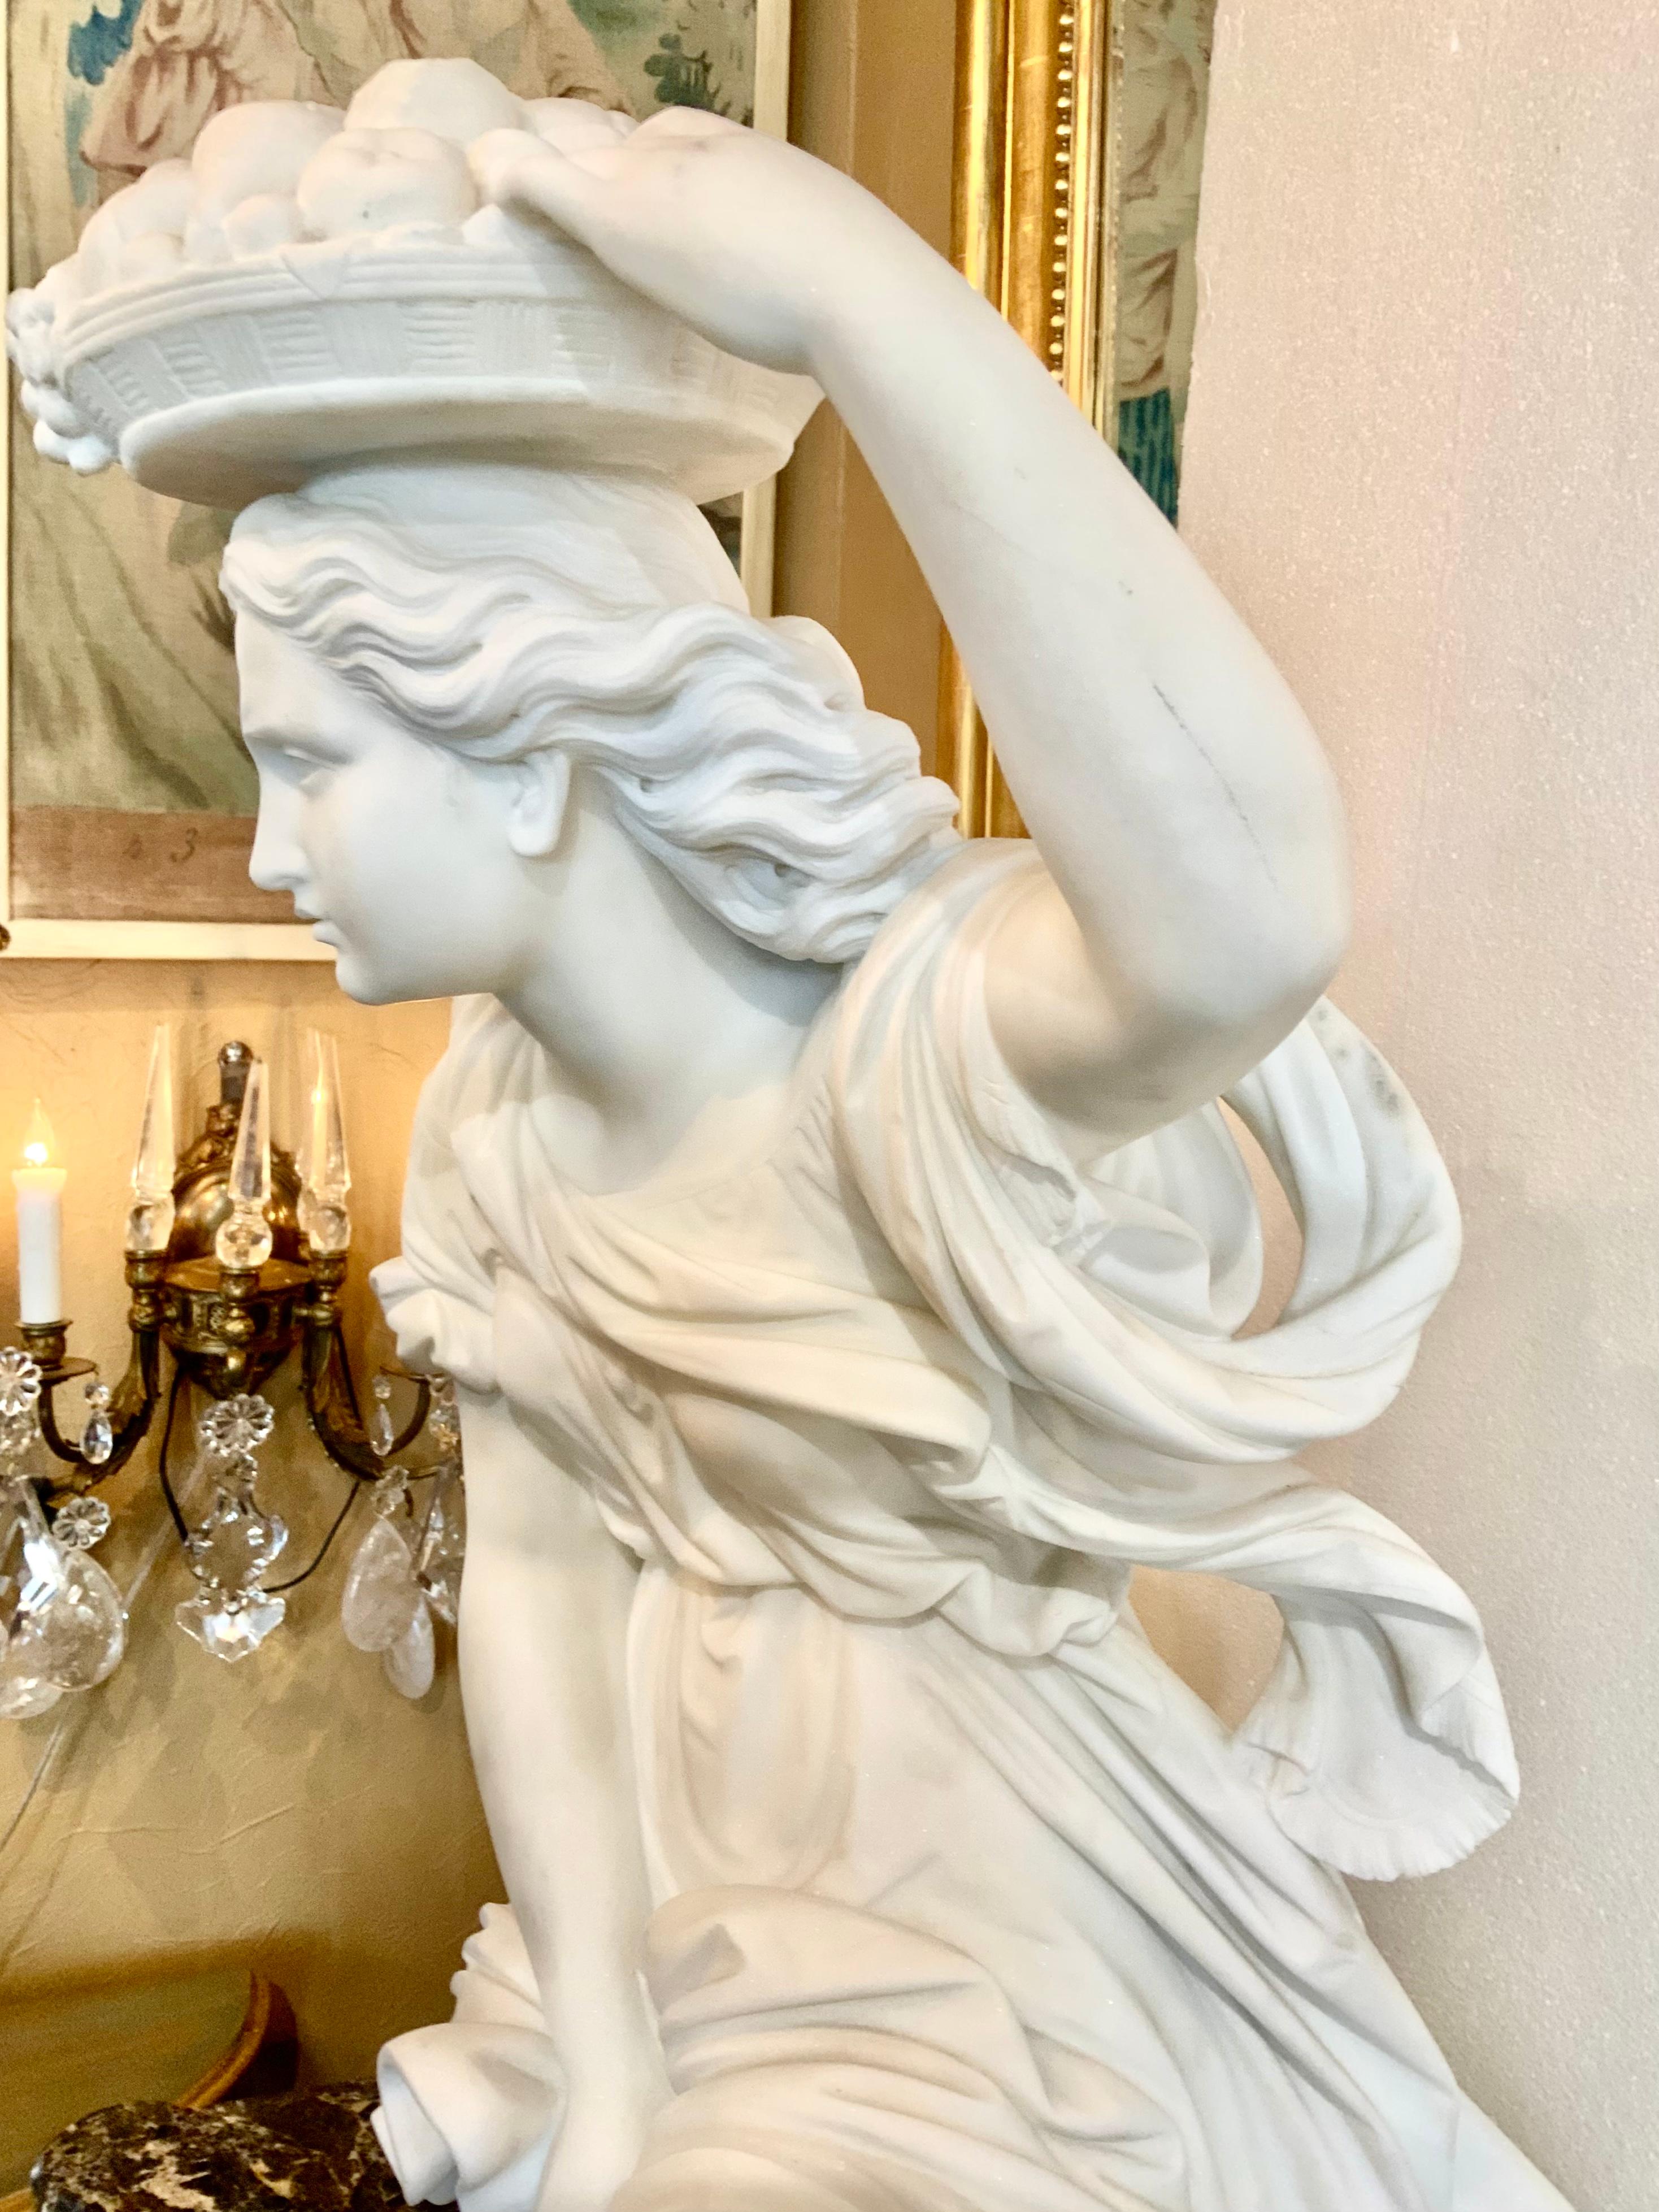 This Italian hand carved marble is of a standing beauty holding a basket
Of fruit on top of her head. It is carved in Carrara white marble and the
Condition is beautiful. There are very slight flea bite chips on the back
Corners of the plinth.